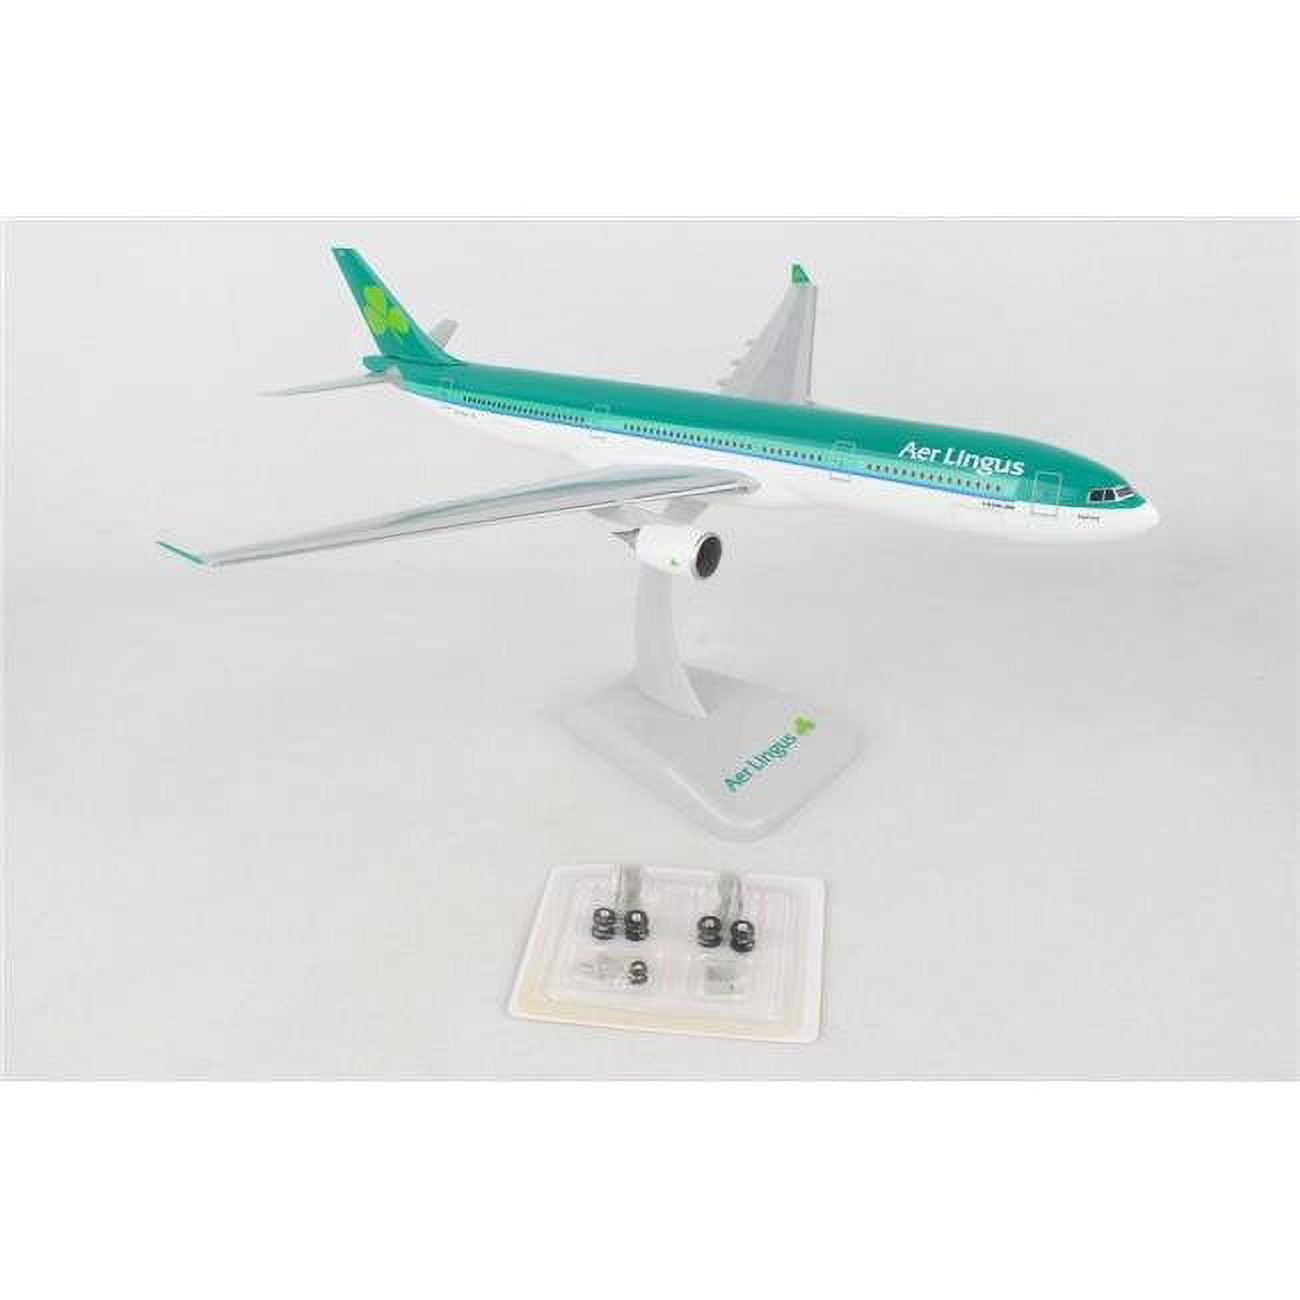 Hogan Wings Hg11144g 1 By 200 Scale Aer Lingus A330-300 Model Airliner With Gear, Registration No.ei-ela